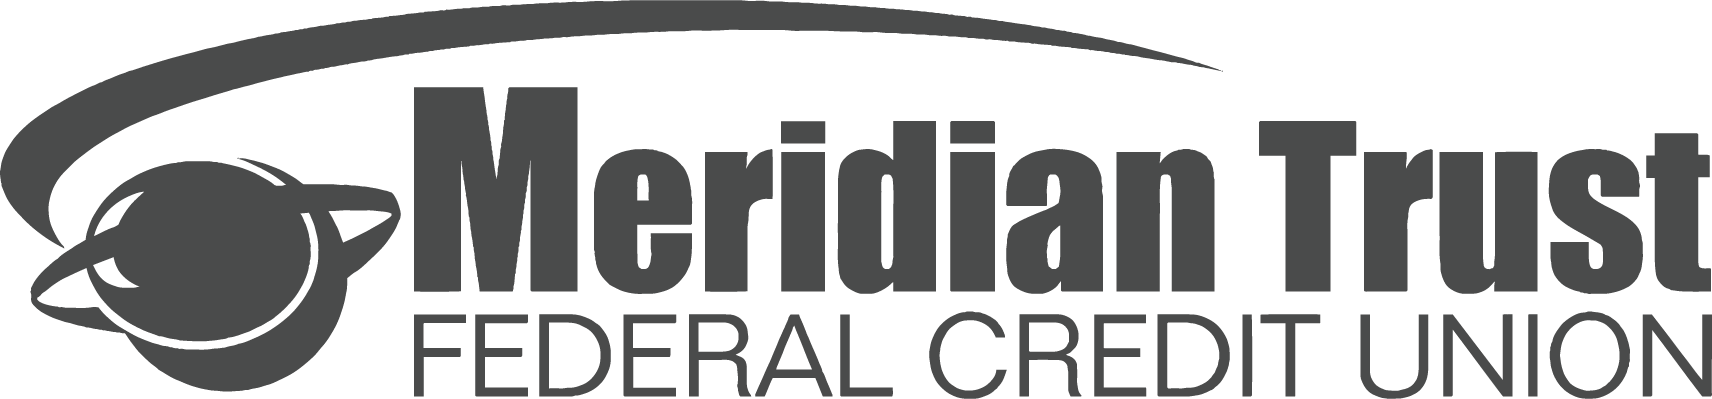 Meridian Trust Federal Credit Union logo colorless